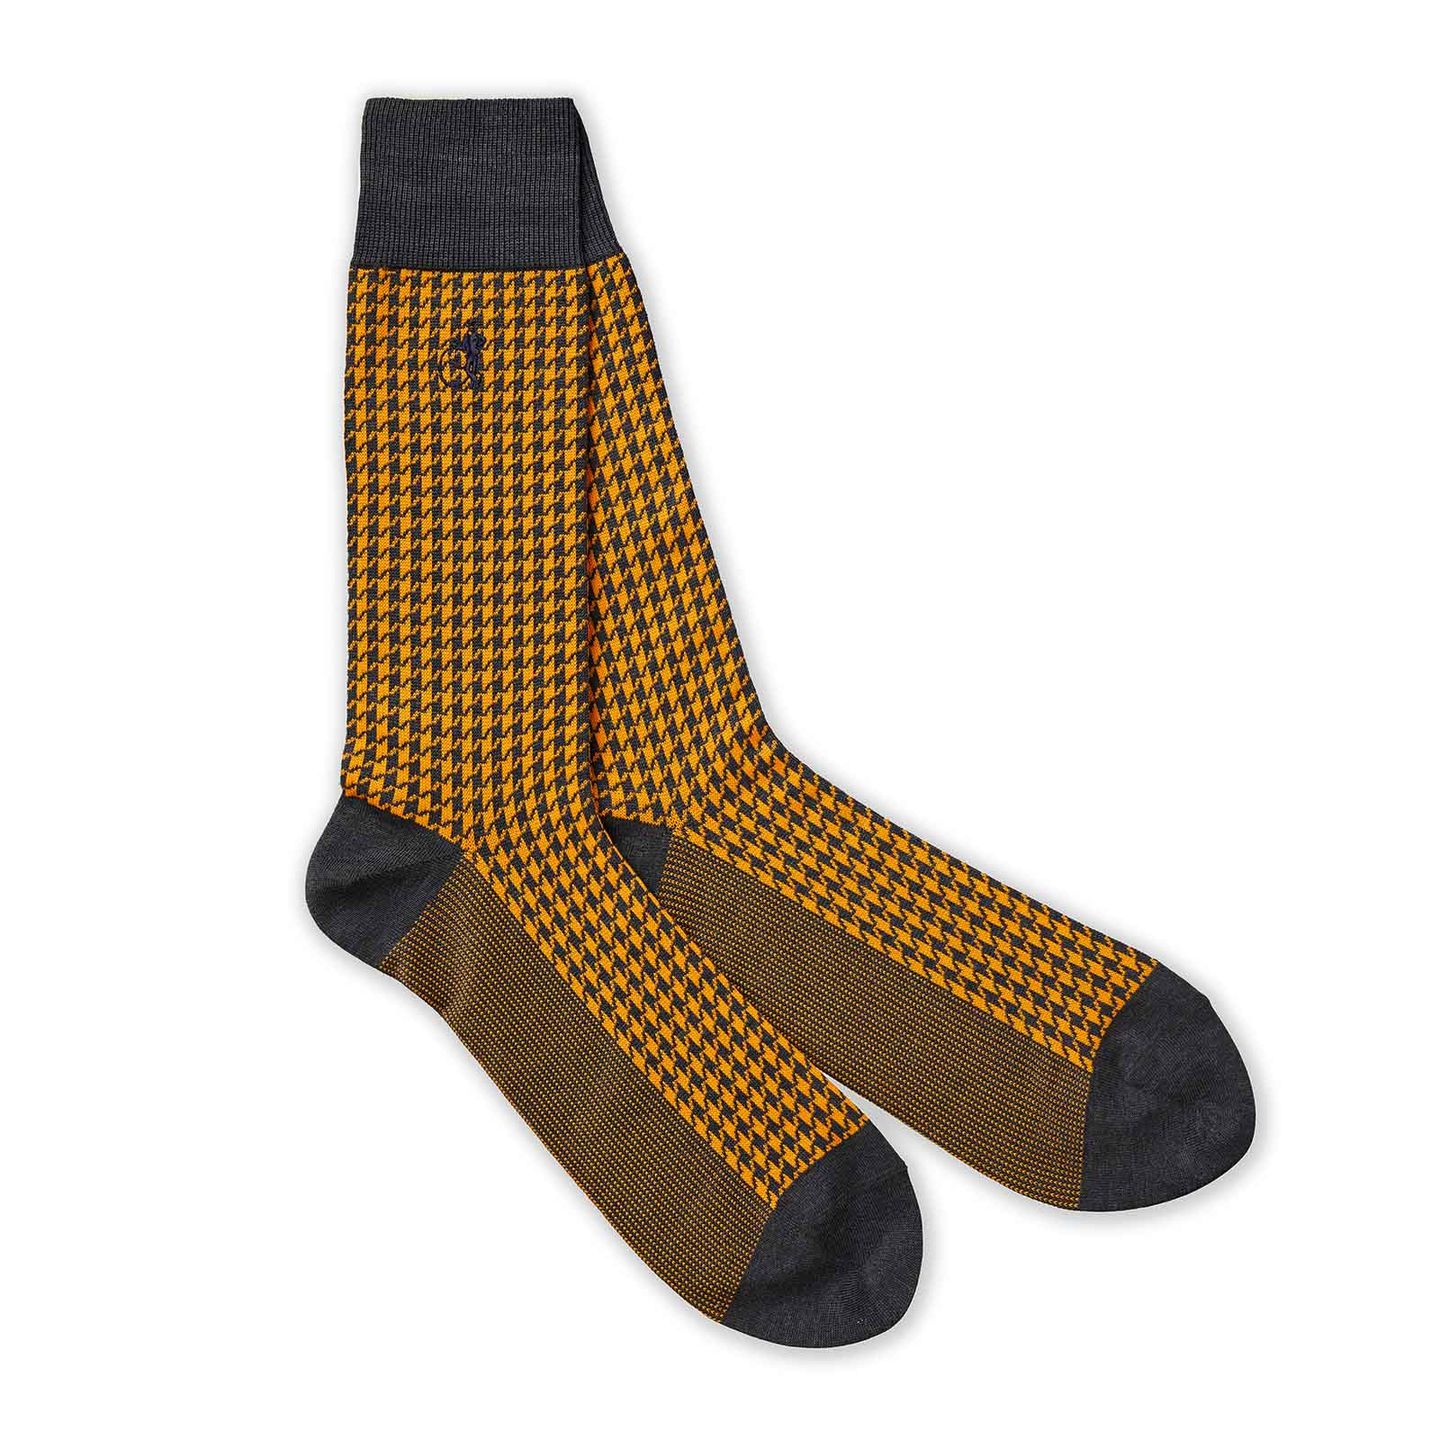 A pair of yellow patterned socks with a white background